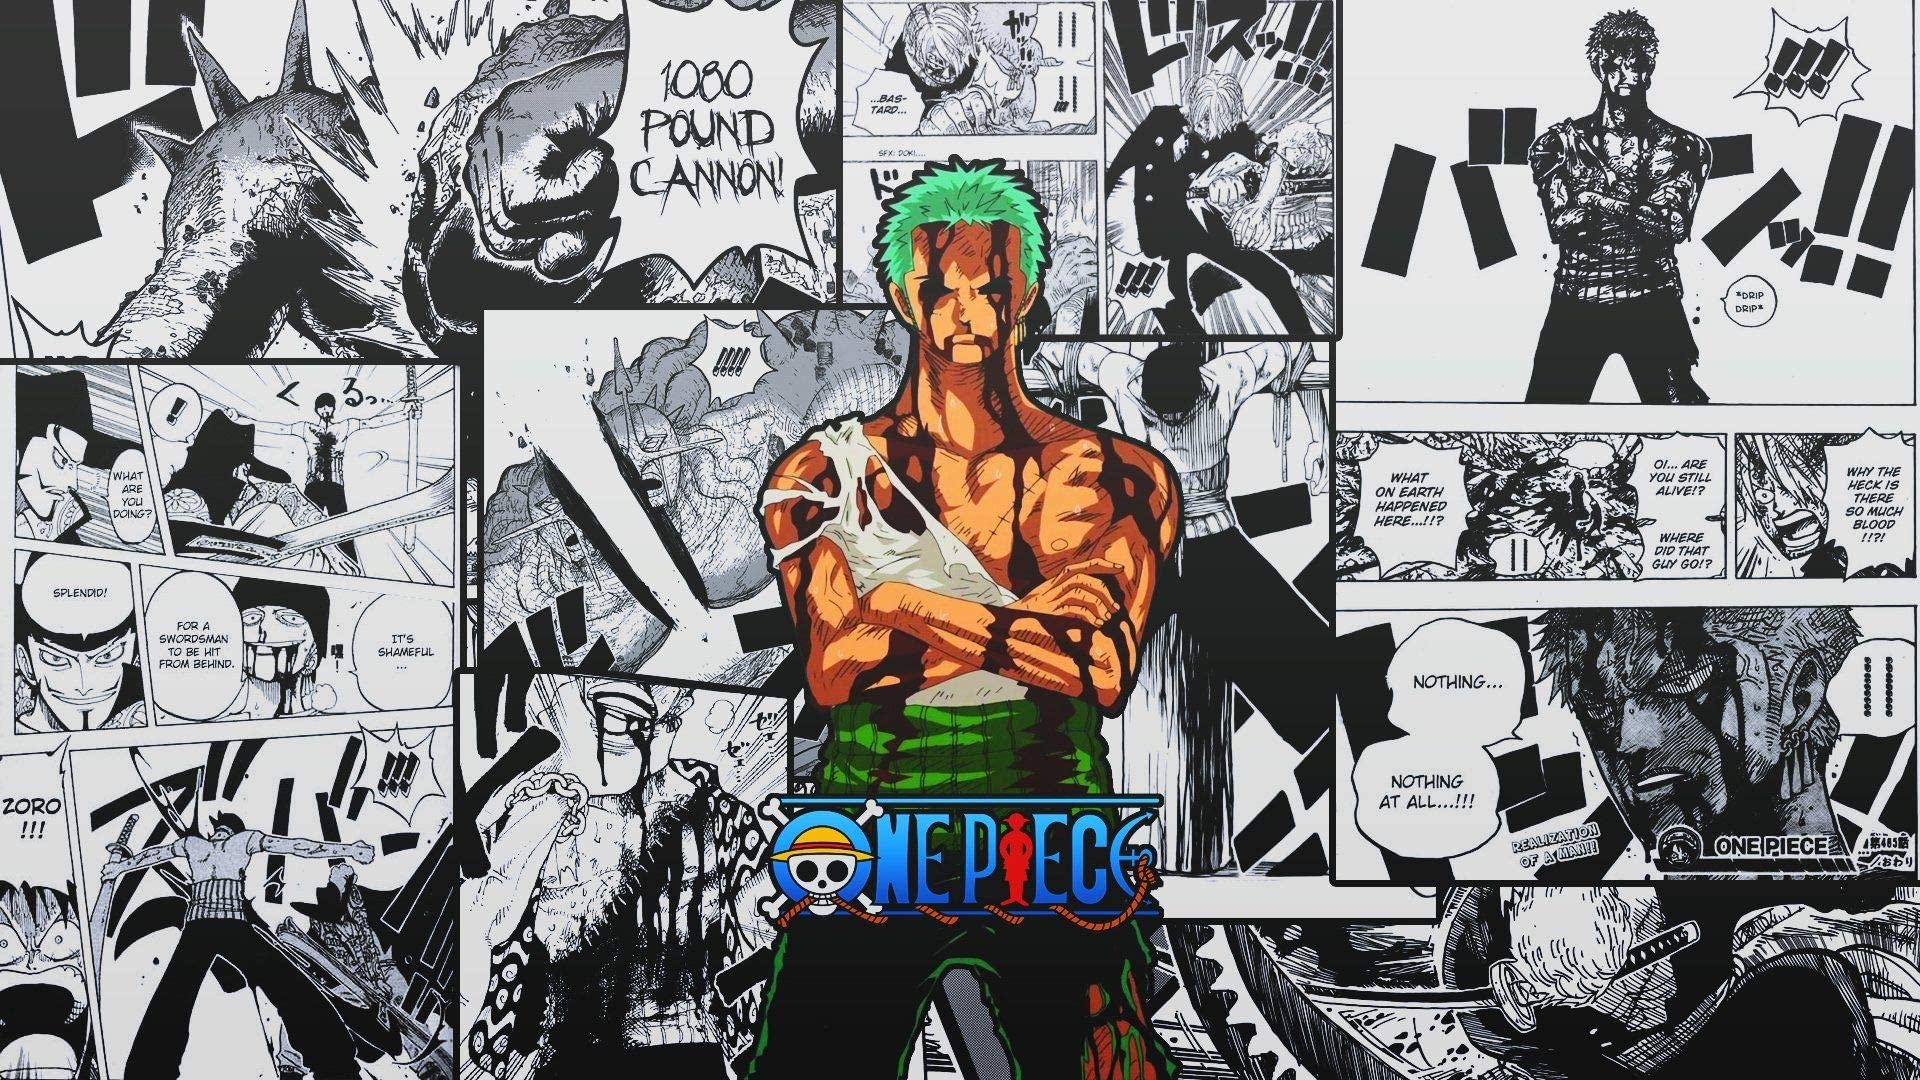  Poster Compatible with One Piece Manga Series, Shanks Dead or  Alive Poster for Walls, Unframed Posters Print, Wall Art, Print Poster,  Home Decor, Art Decor, Home Design: Posters & Prints